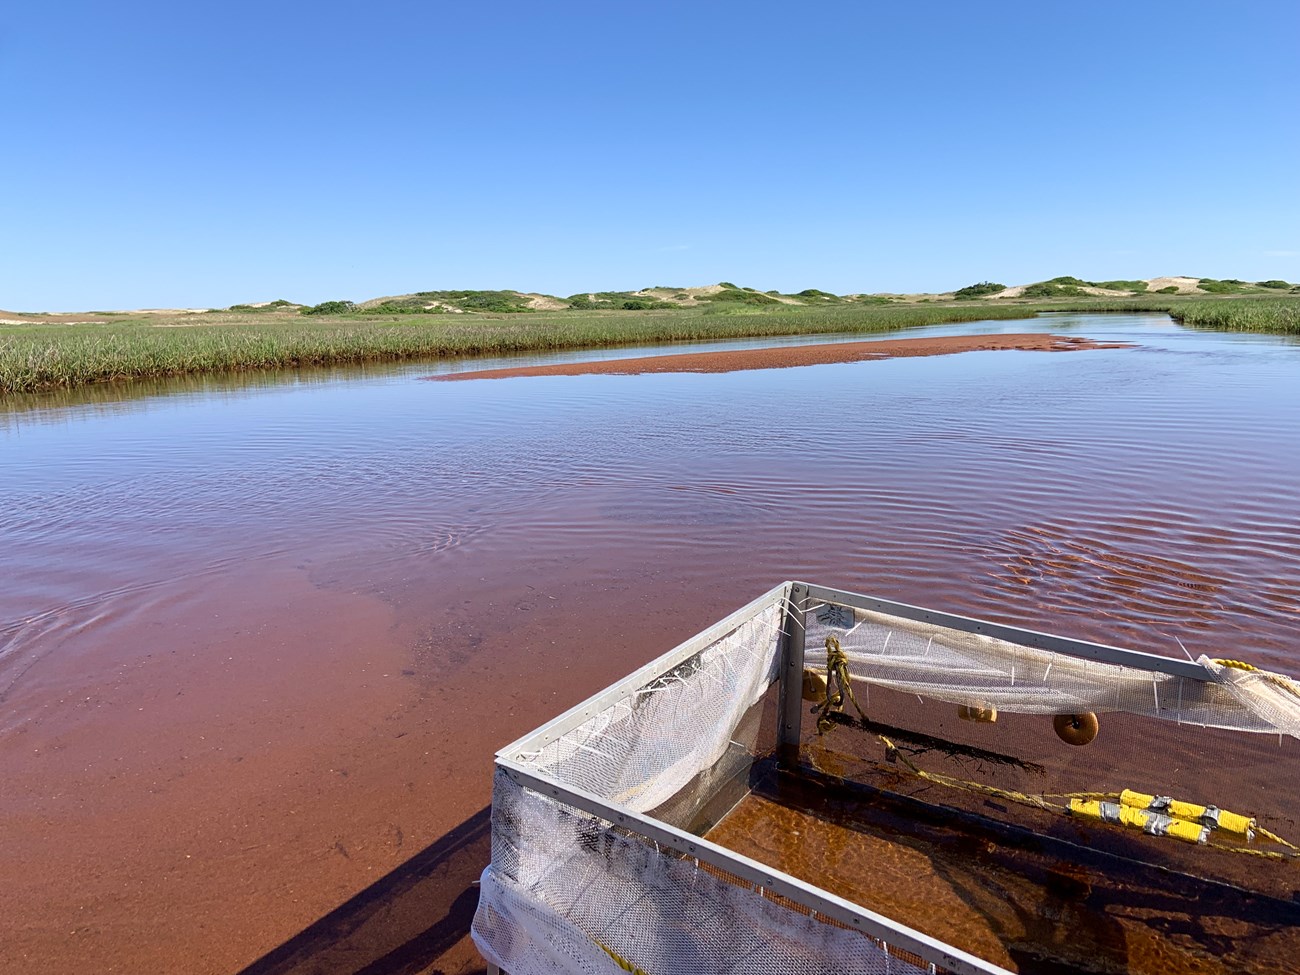 A square, netted frame stands in a shallow river with reddish sand. Vegetated sand dunes frame the background